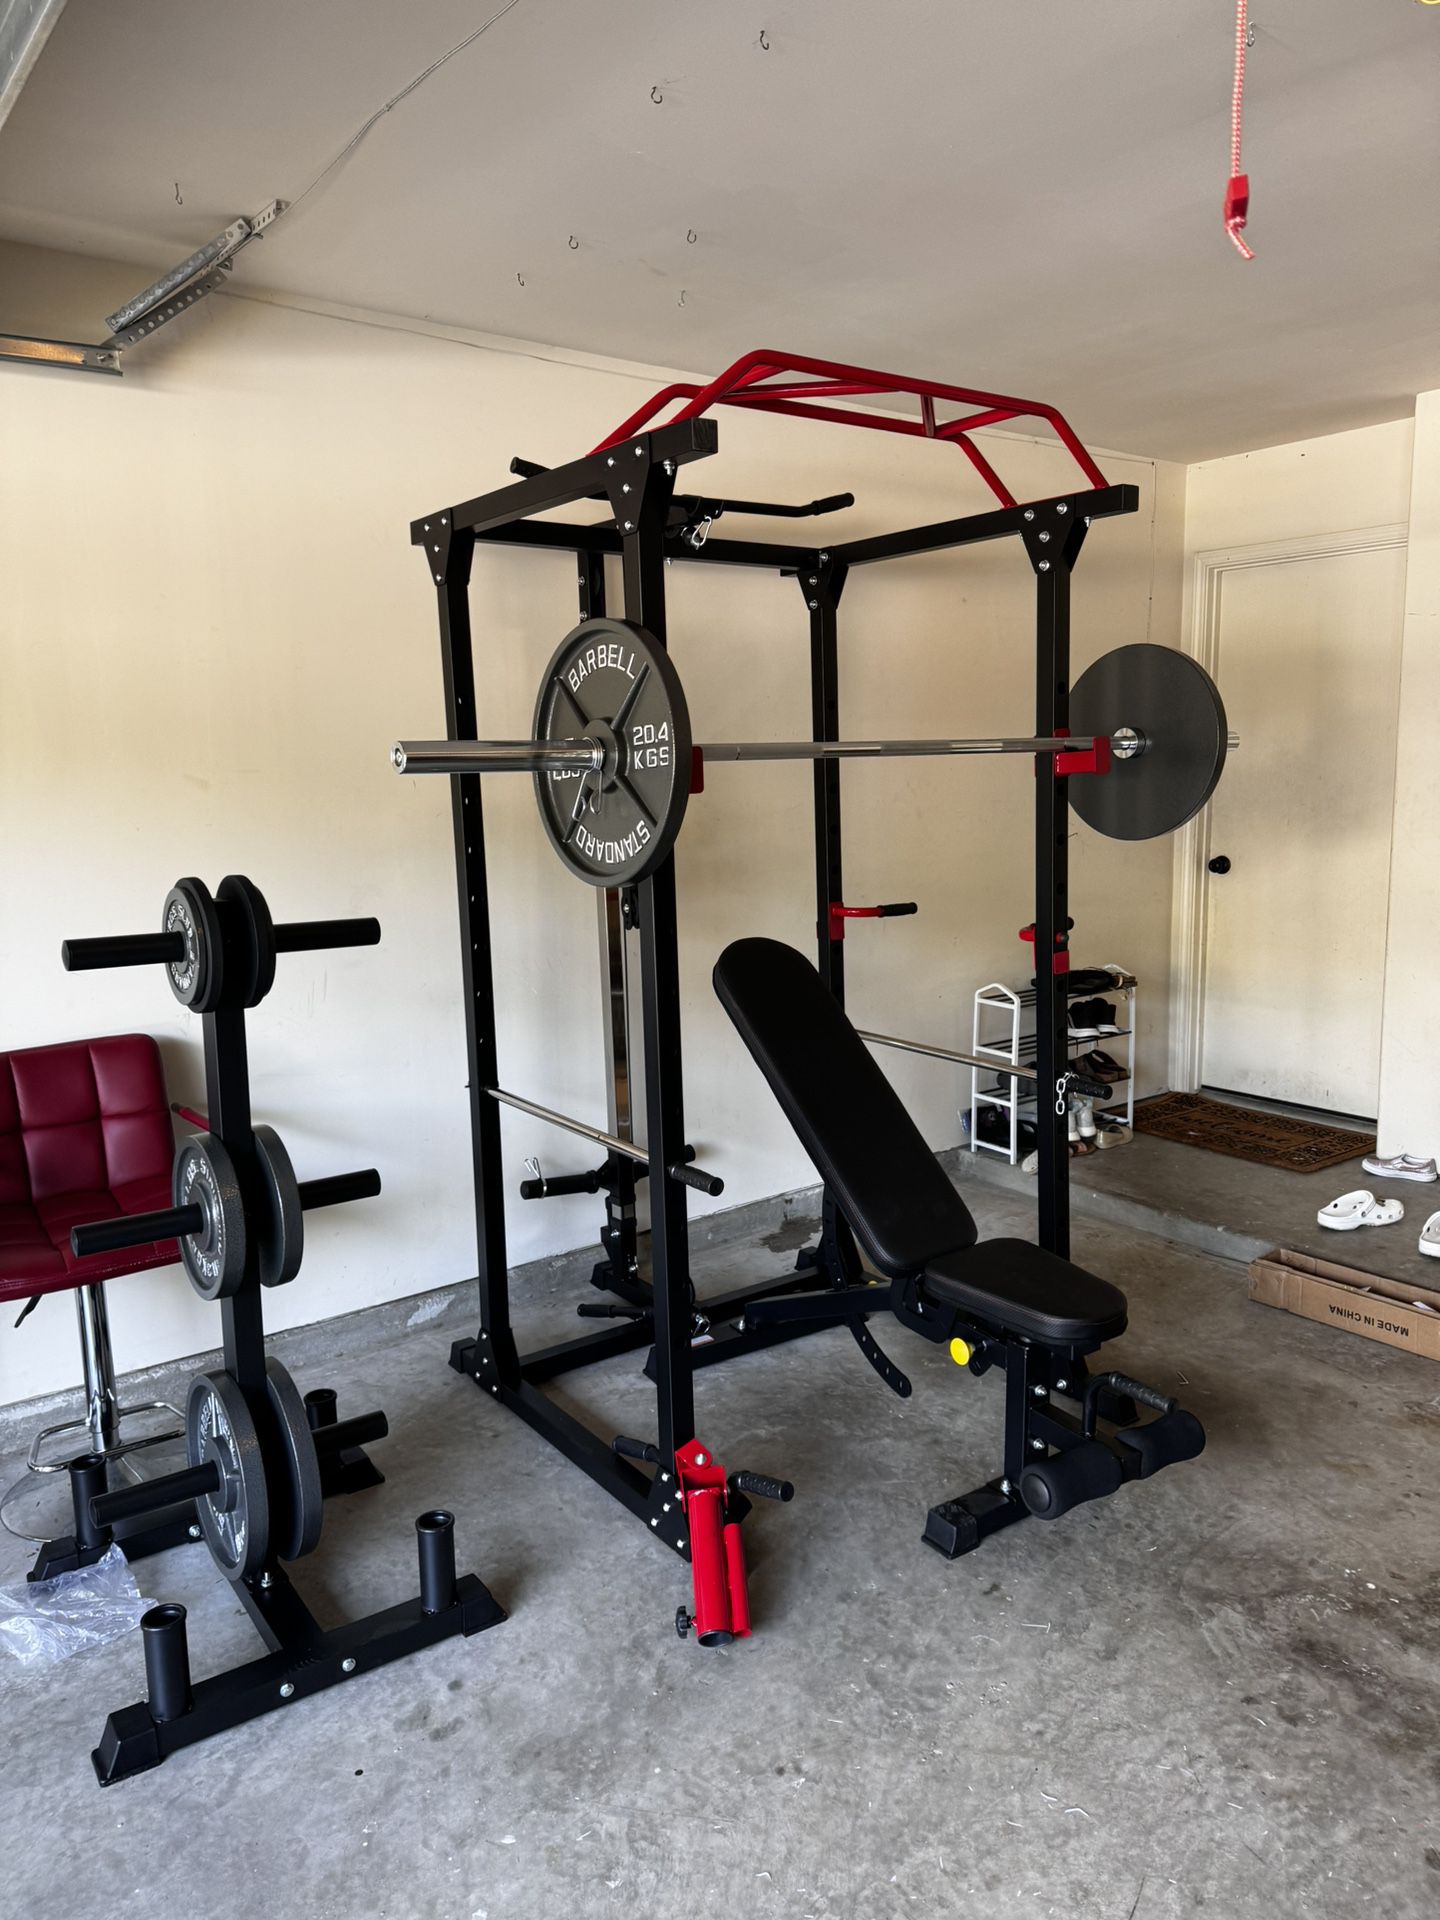 Flash T10 Home Gym Setup Squat Rack, Barbell, Weights And Bench